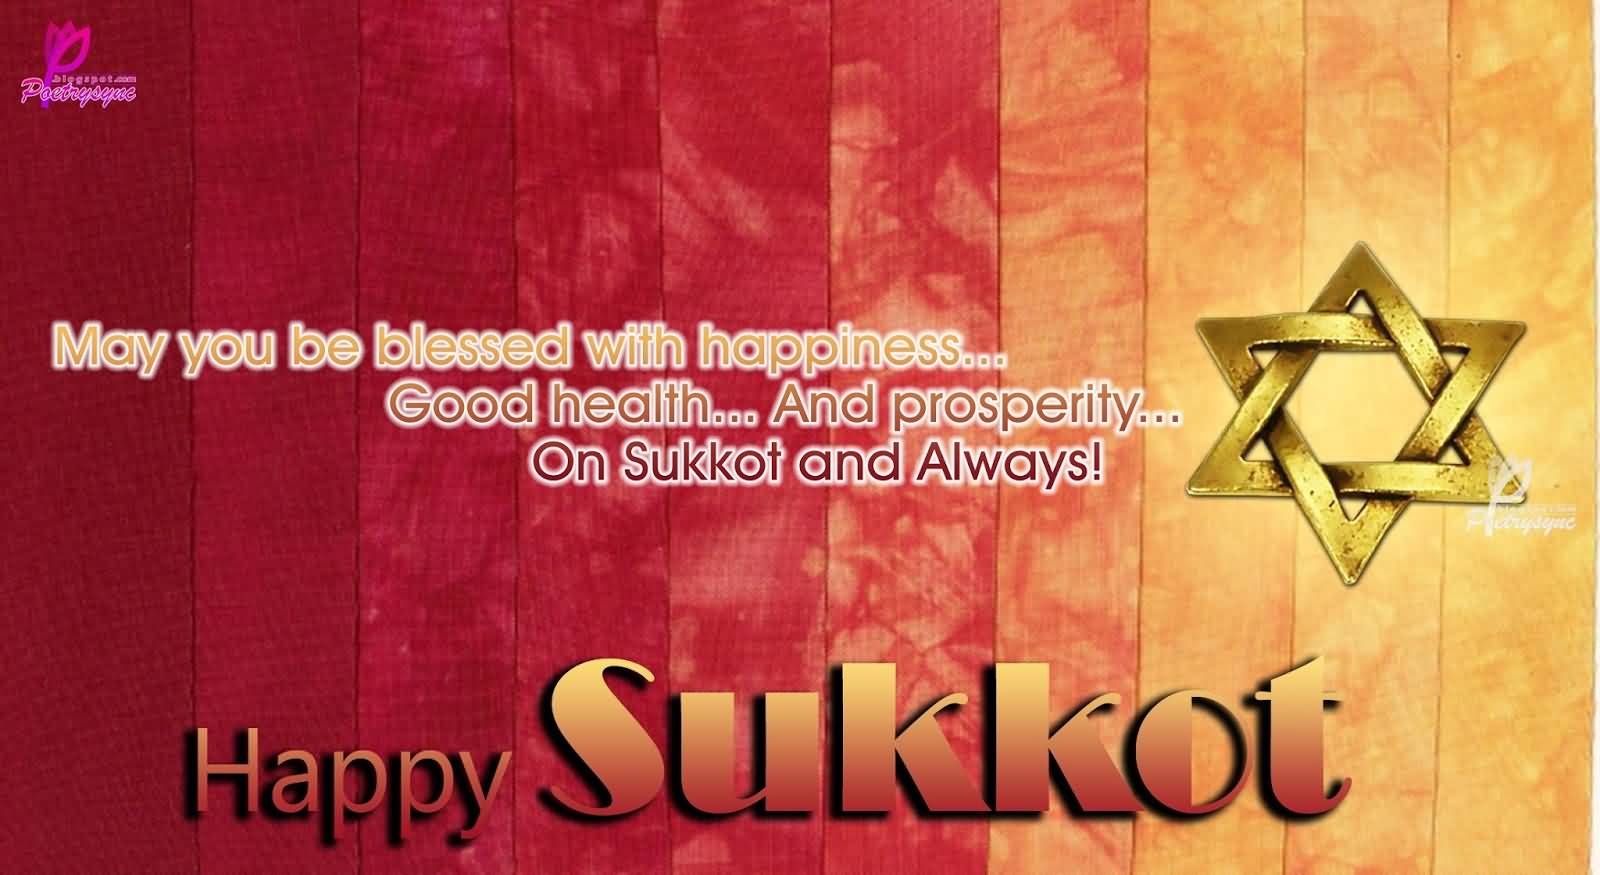 Happy Sukkot Wishes To You And Your Family